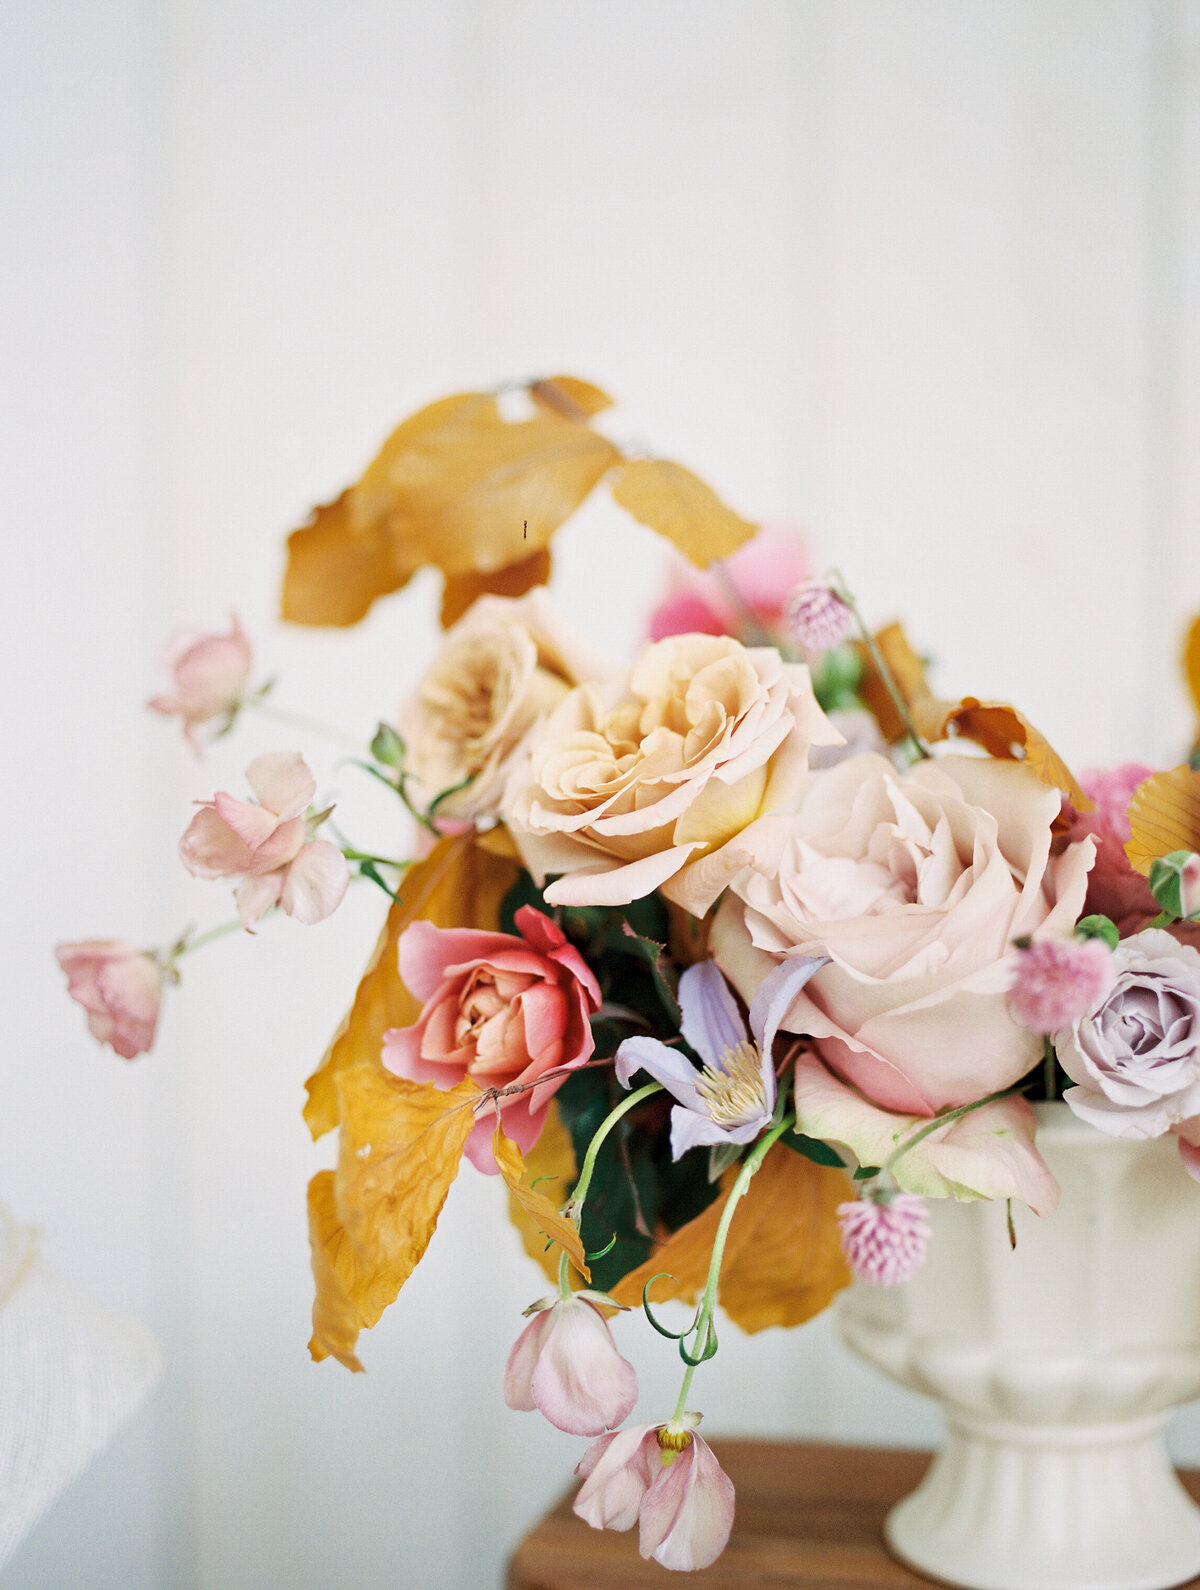 Closeup of floral centerpiece with pastel colors and pops of pink and goldenrod.